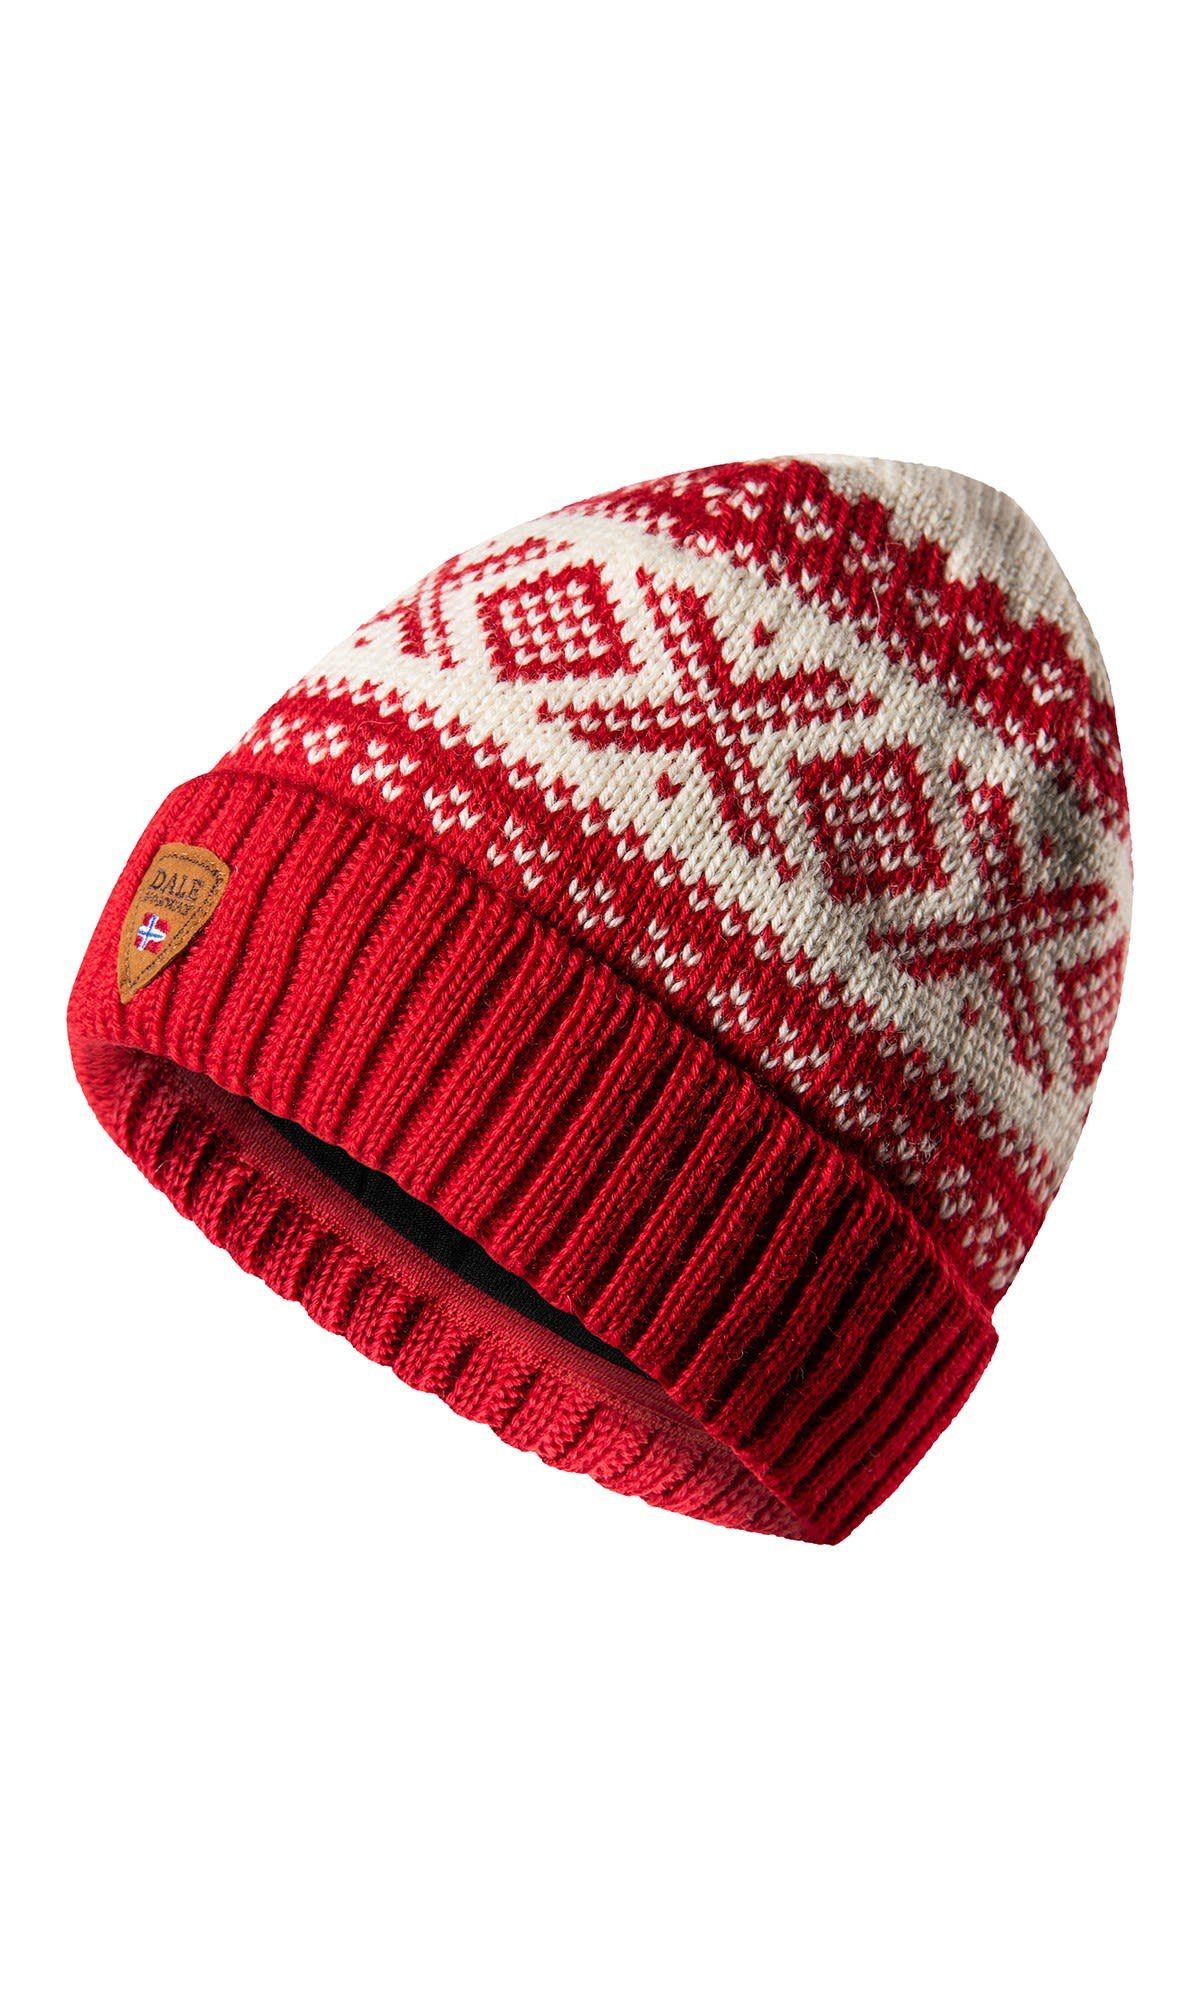 Dale of Norway Beanie Norway Dale Red - 1956 Cortina Of Accessoires Hat White